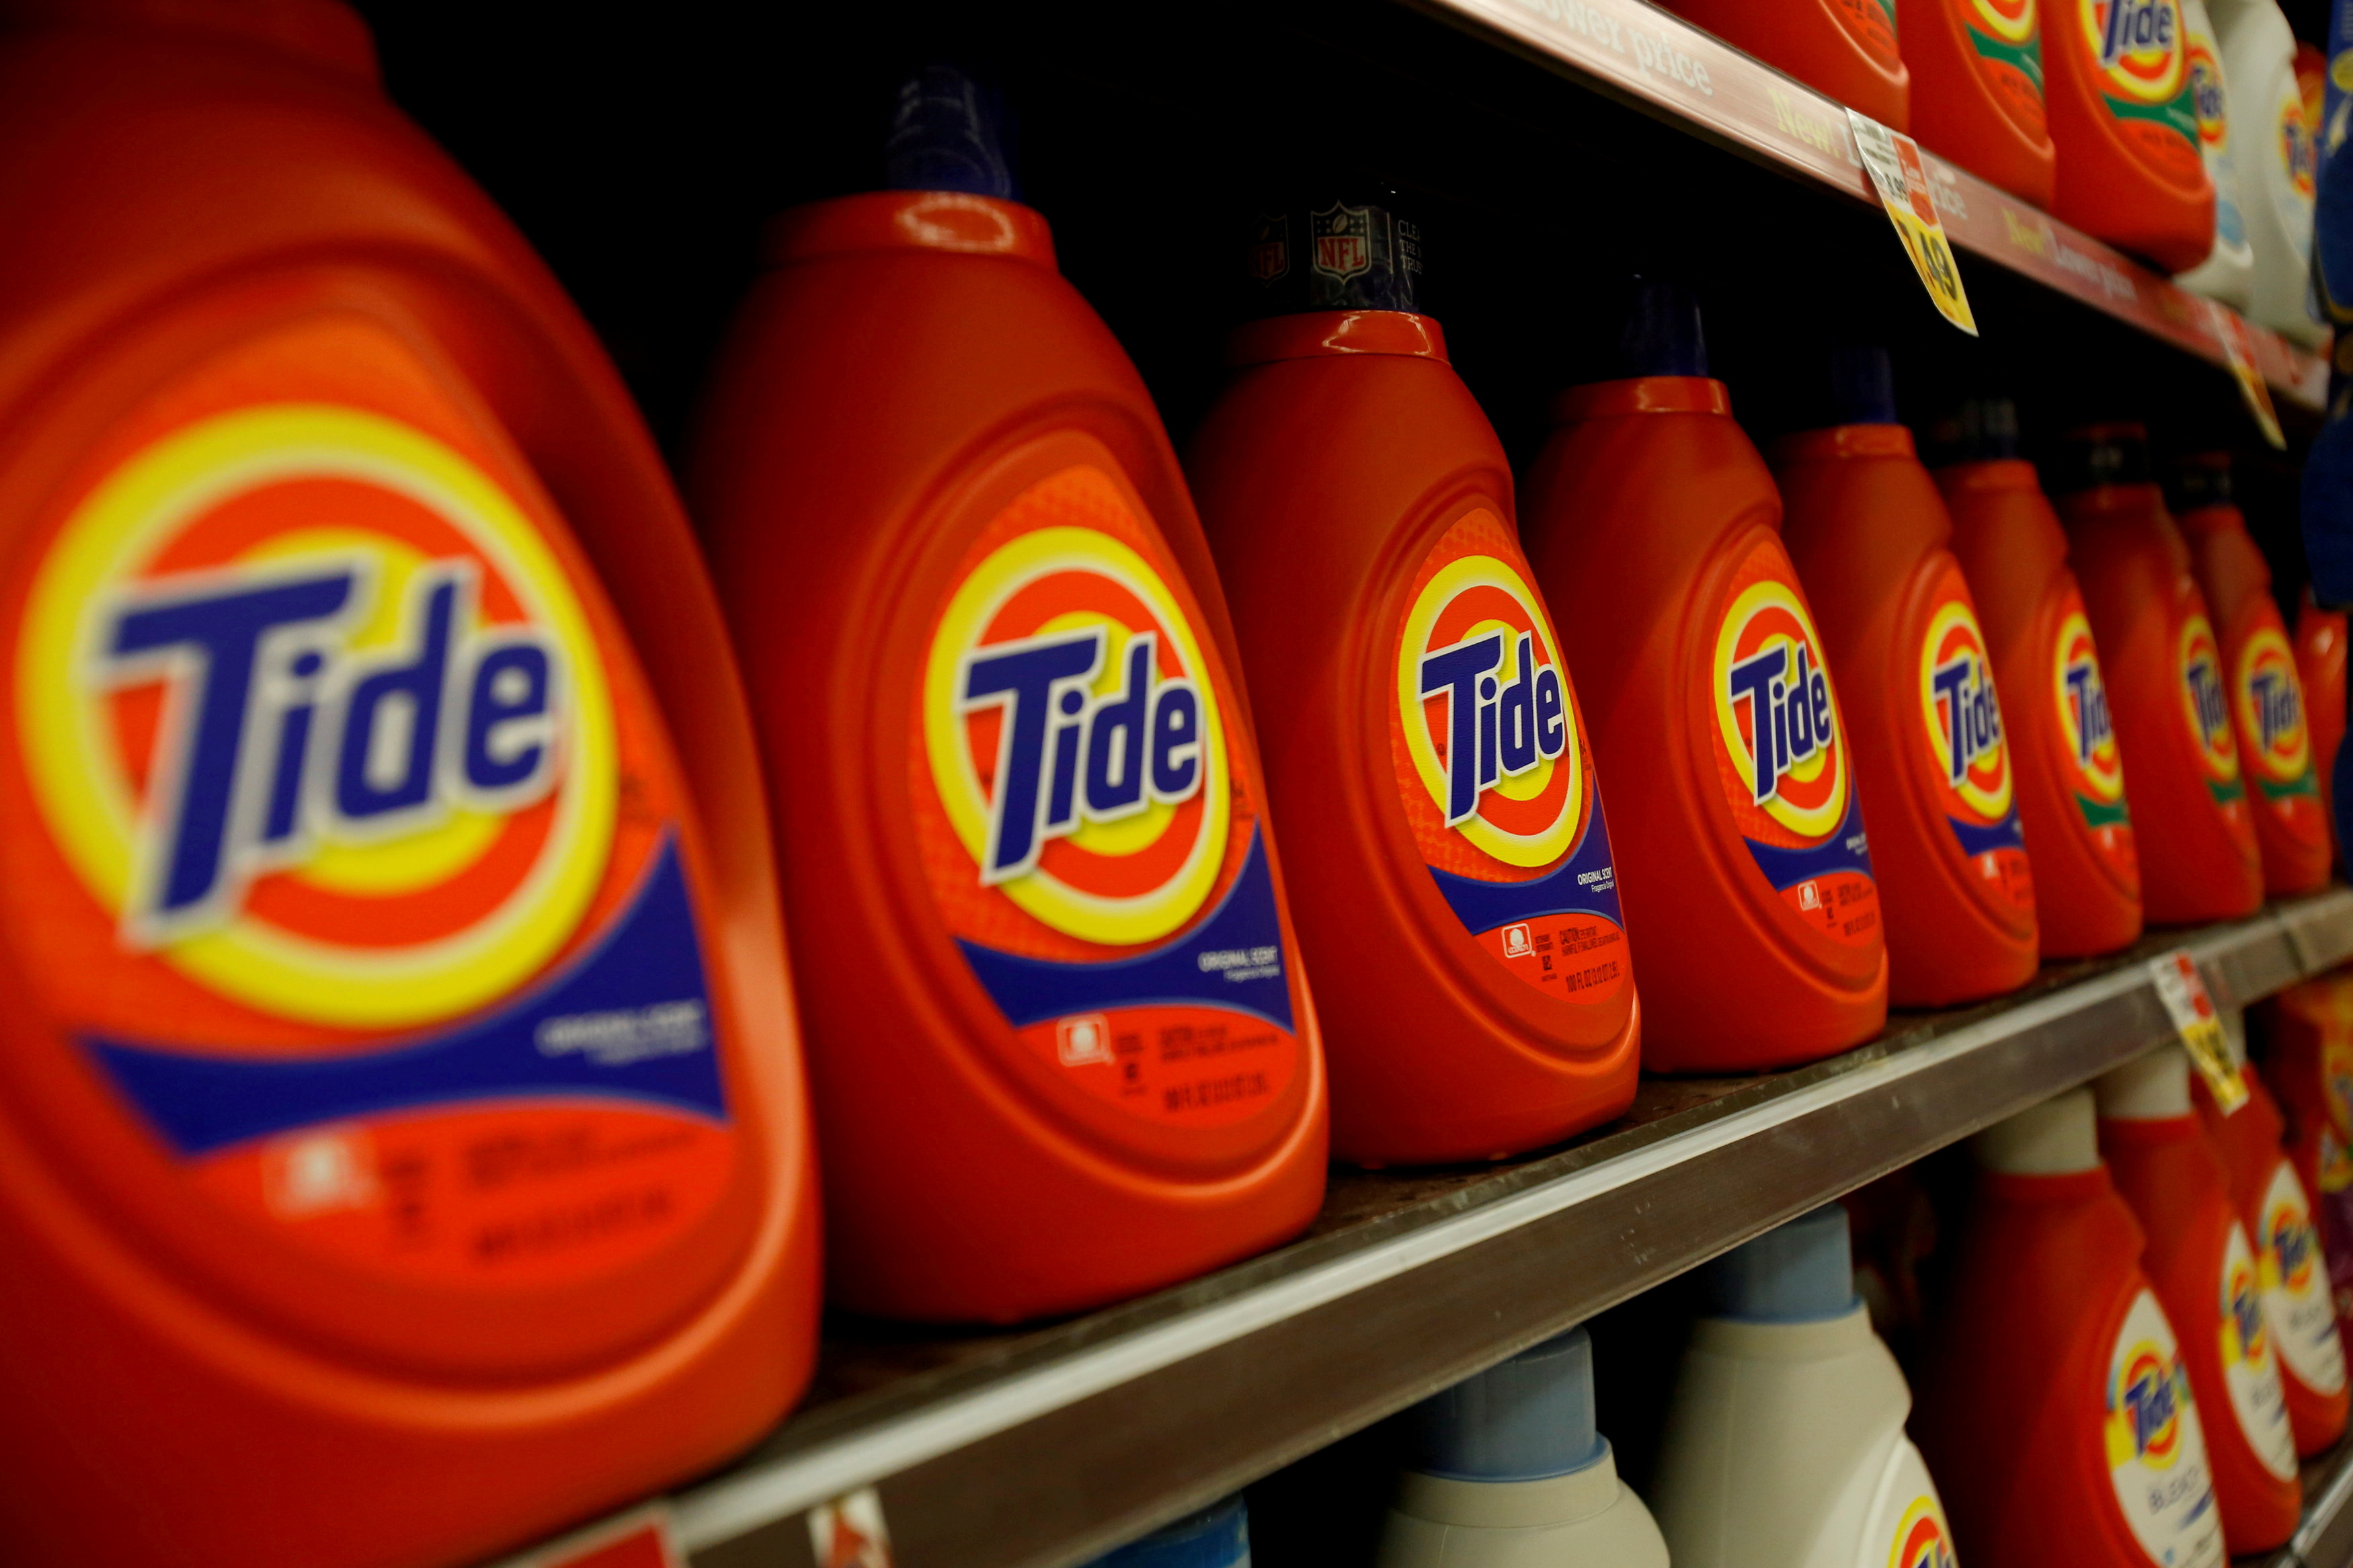 Tide laundry detergent, a product distributed by Procter & Gamble, is pictured on sale at a Ralphs grocery store in Pasadena, California January 21, 2014.  REUTERS/Mario Anzuoni 